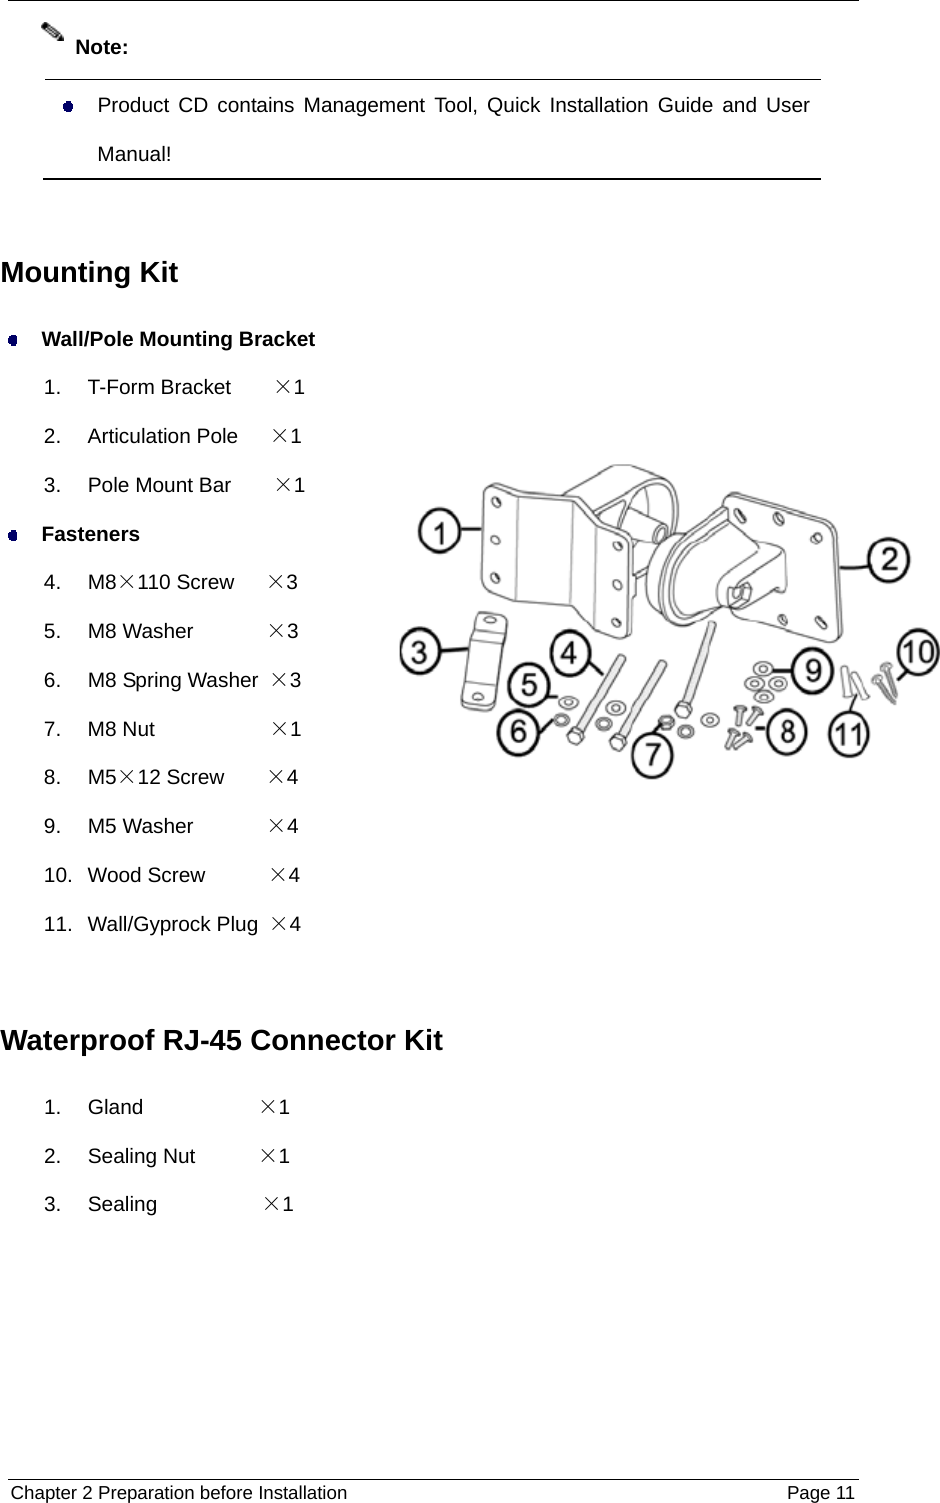  Chapter 2 Preparation before Installation  Page 11   Product CD contains Management Tool, Quick Installation Guide and User Manual!  Mounting Kit  Wall/Pole Mounting Bracket 1.  T-Form Bracket    ×1 2.  Articulation Pole   ×1 3.  Pole Mount Bar    ×1  Fasteners 4. M8×110 Screw   ×3 5.  M8 Washer       ×3 6. M8 Spring Washer ×3 7.  M8 Nut           ×1 8. M5×12 Screw    ×4 9.  M5 Washer       ×4 10.  Wood Screw      ×4 11. Wall/Gyprock Plug ×4  Waterproof RJ-45 Connector Kit 1.  Gland           ×1 2.  Sealing Nut      ×1 3.  Sealing          ×1 Note: 